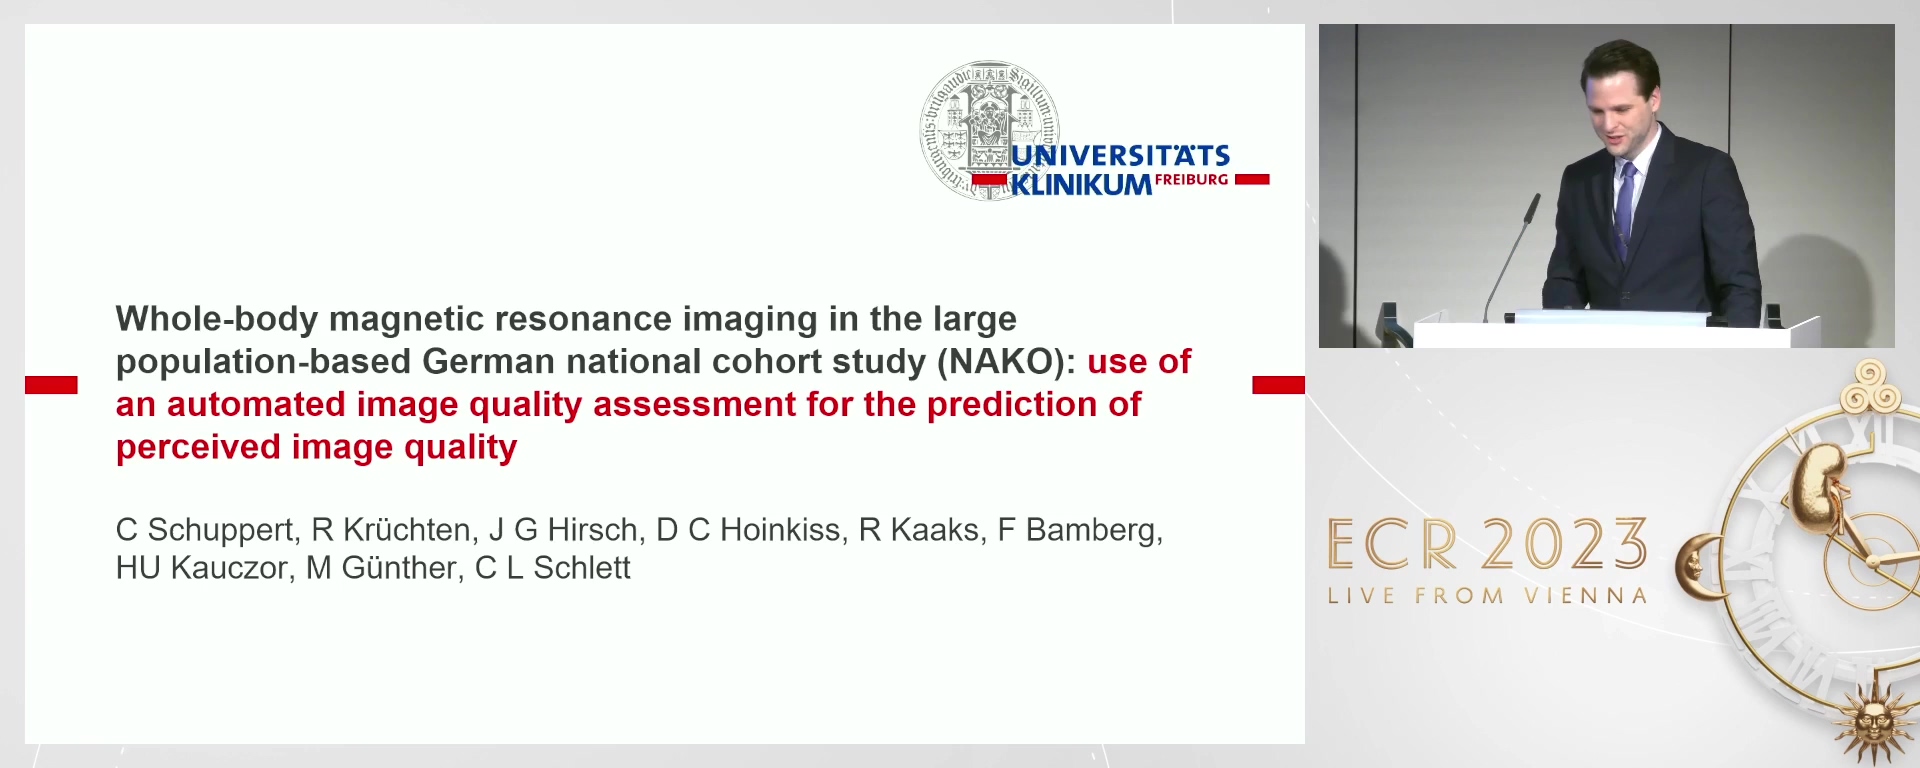 Whole-body magnetic resonance imaging in the large population-based German national cohort study (NAKO): use of an automated image quality assessment for the prediction of perceived image quality